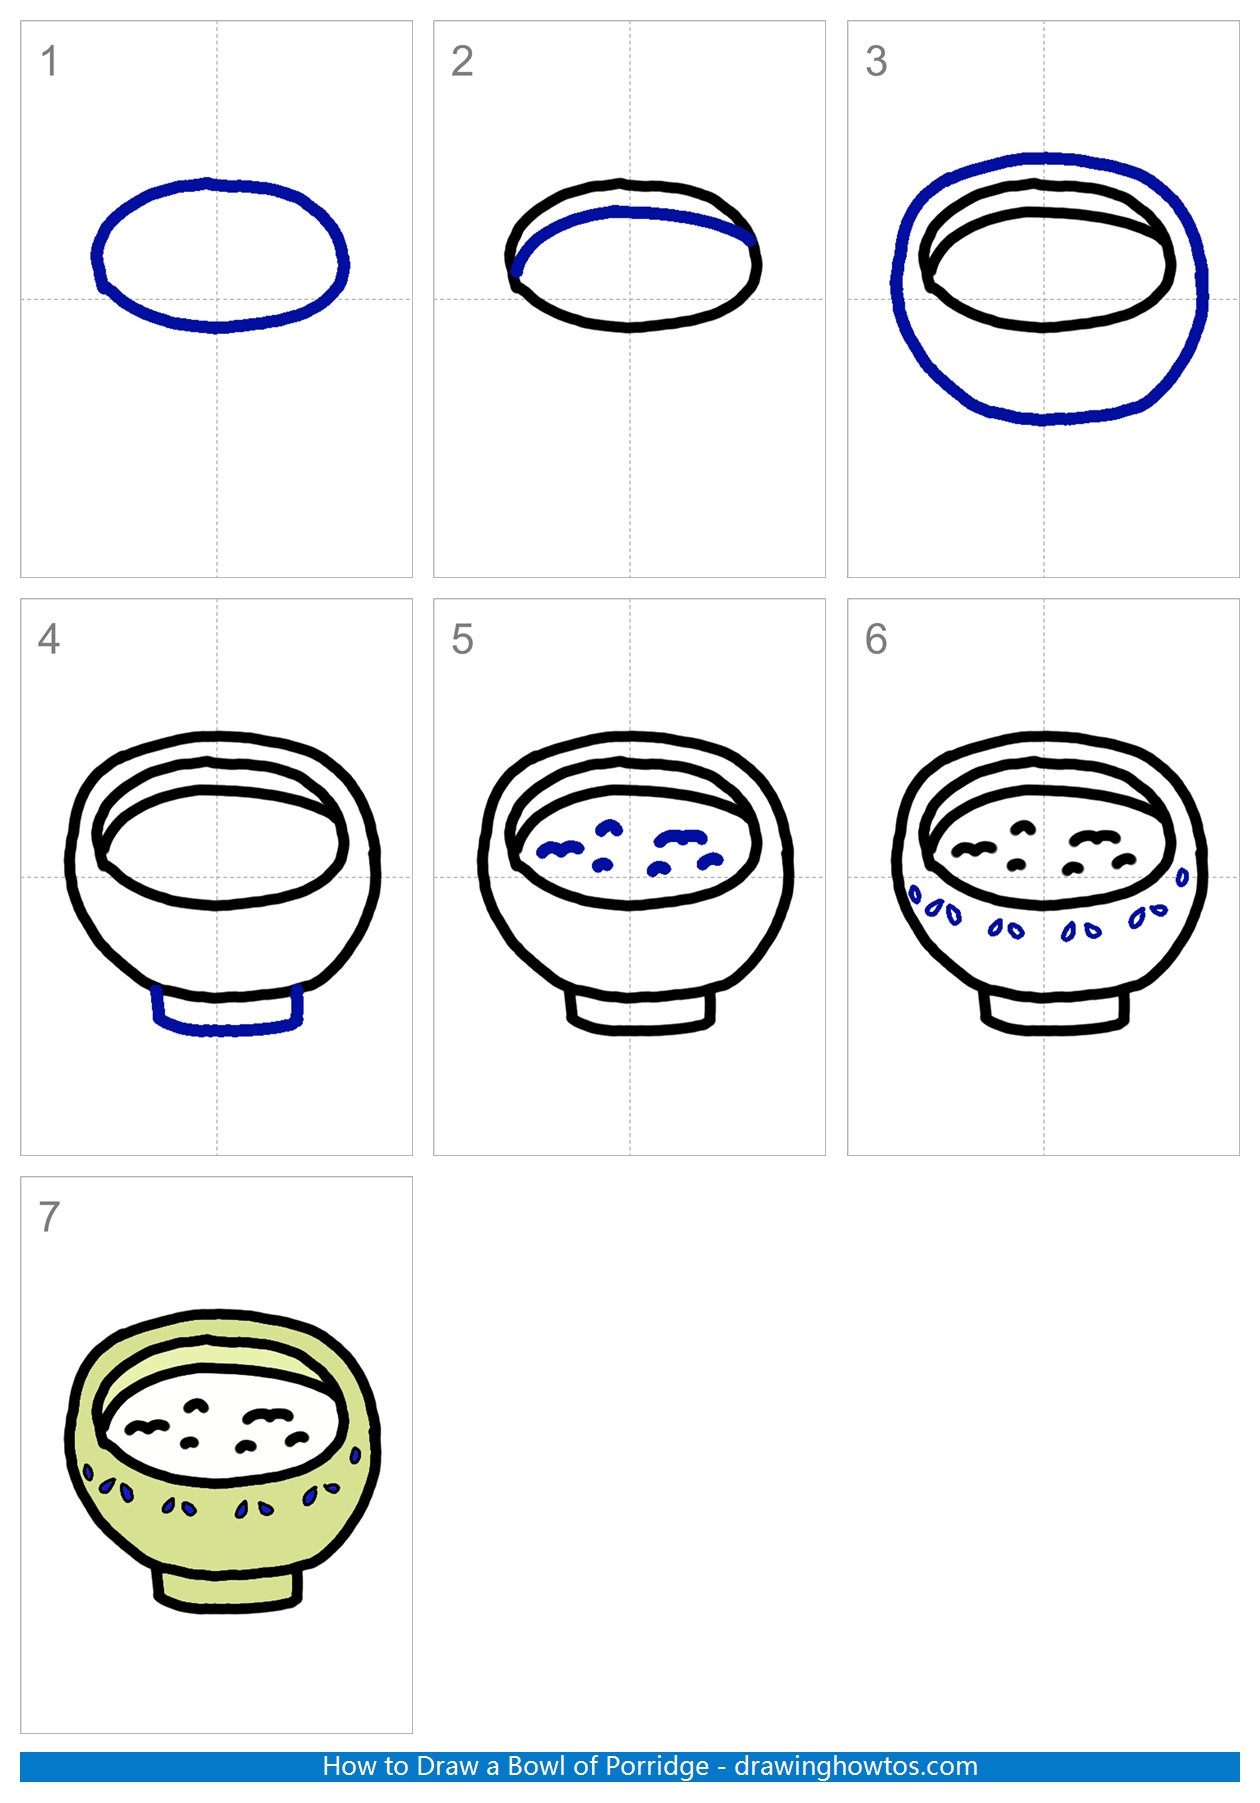 How to Draw a Bowl of Porridge Step by Step